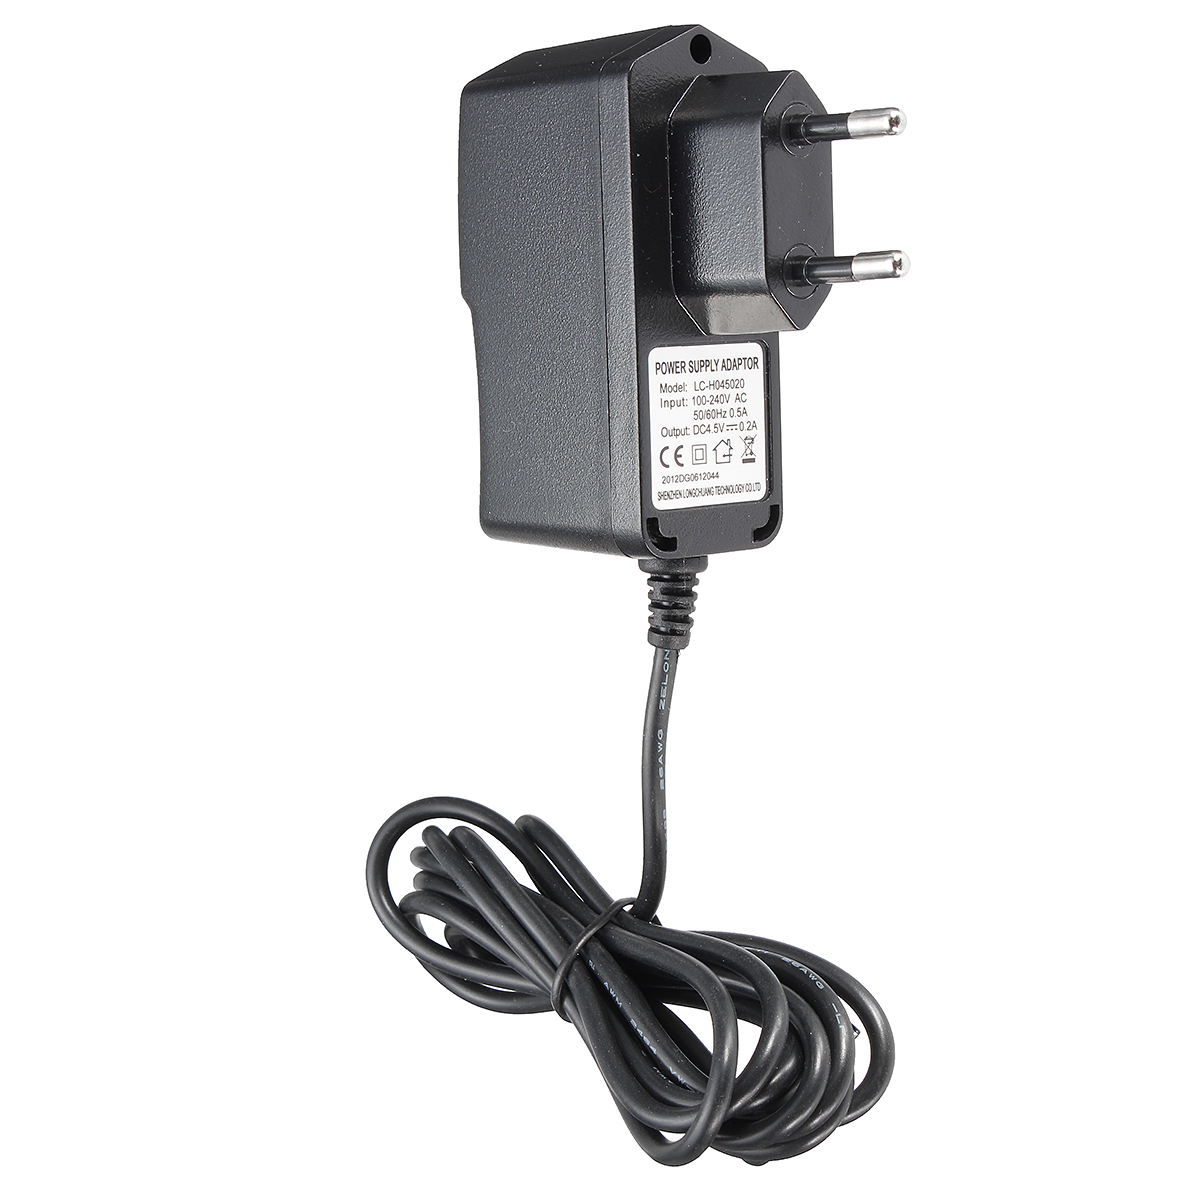 AC-100-V-240V-DC-45V-02-Adapter-USEU-Plug-Power-Supply-Charger-For-Wireless-Weather-Station-Clock-1389379-5